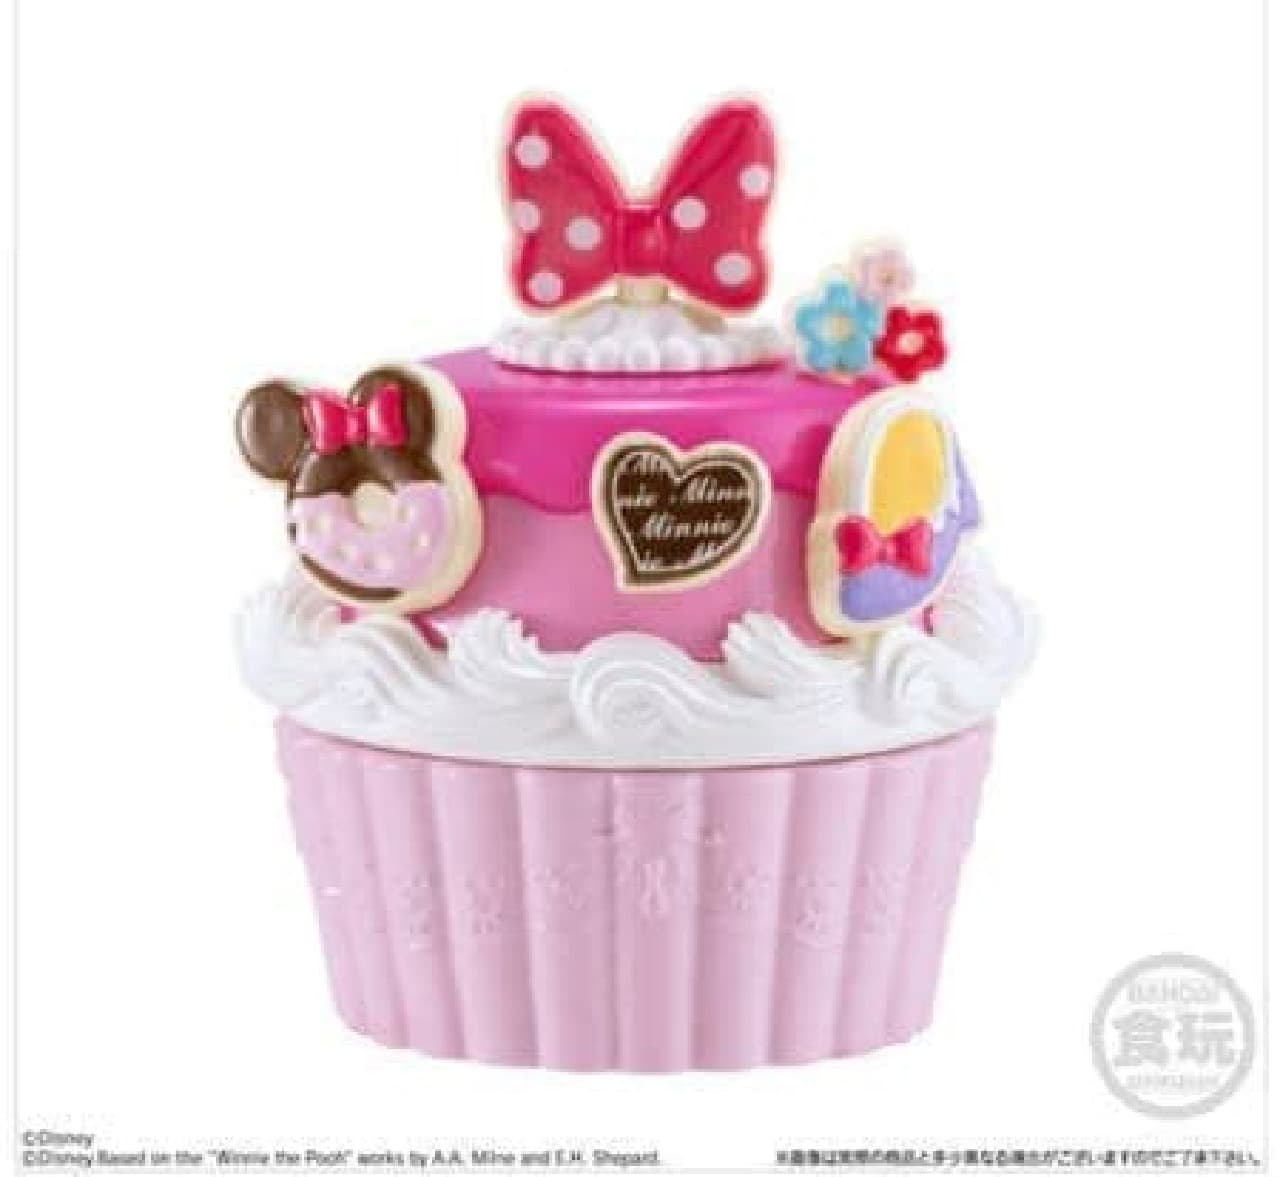 Bandai Candy Division "Disney Party Cake Topping"